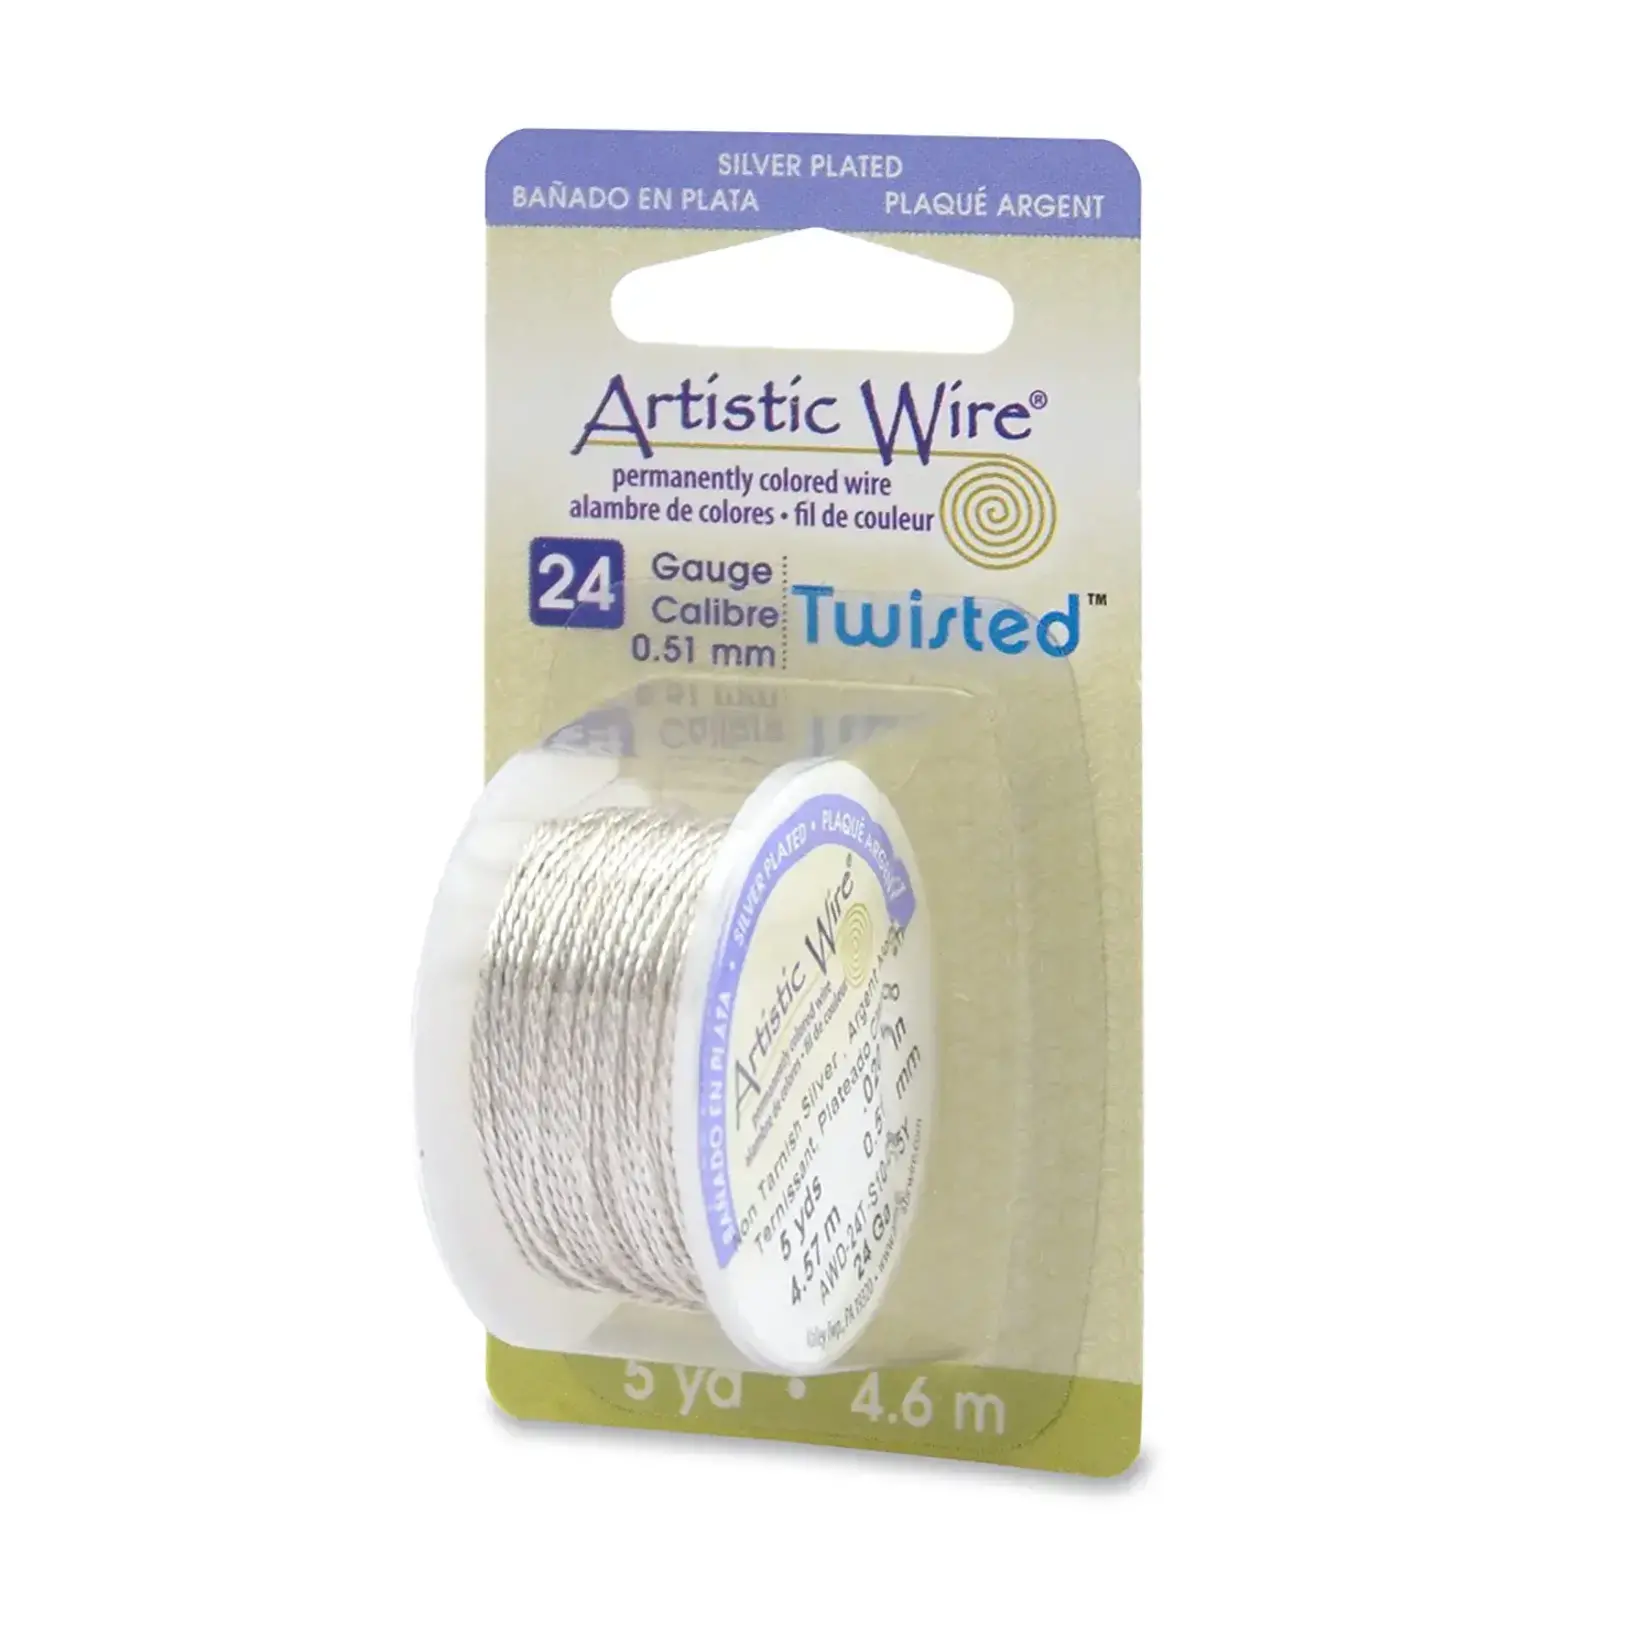 Artistic Wire Artistic Wire Tarnish Resistant Silver Twisted, 24 Gauge, 5 yard Spool